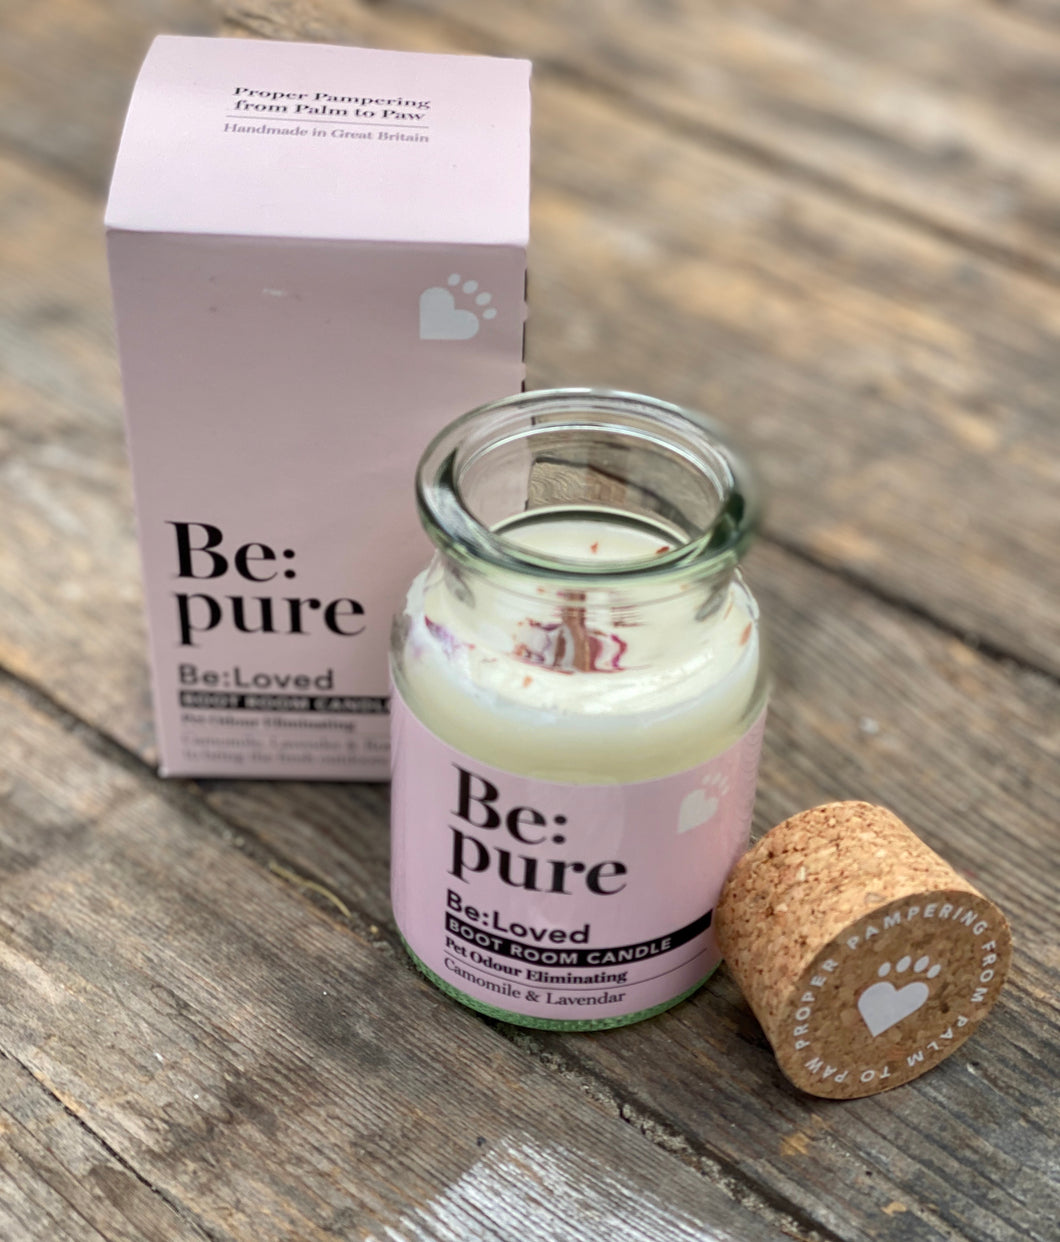 Be:Pure “pet odour” candle